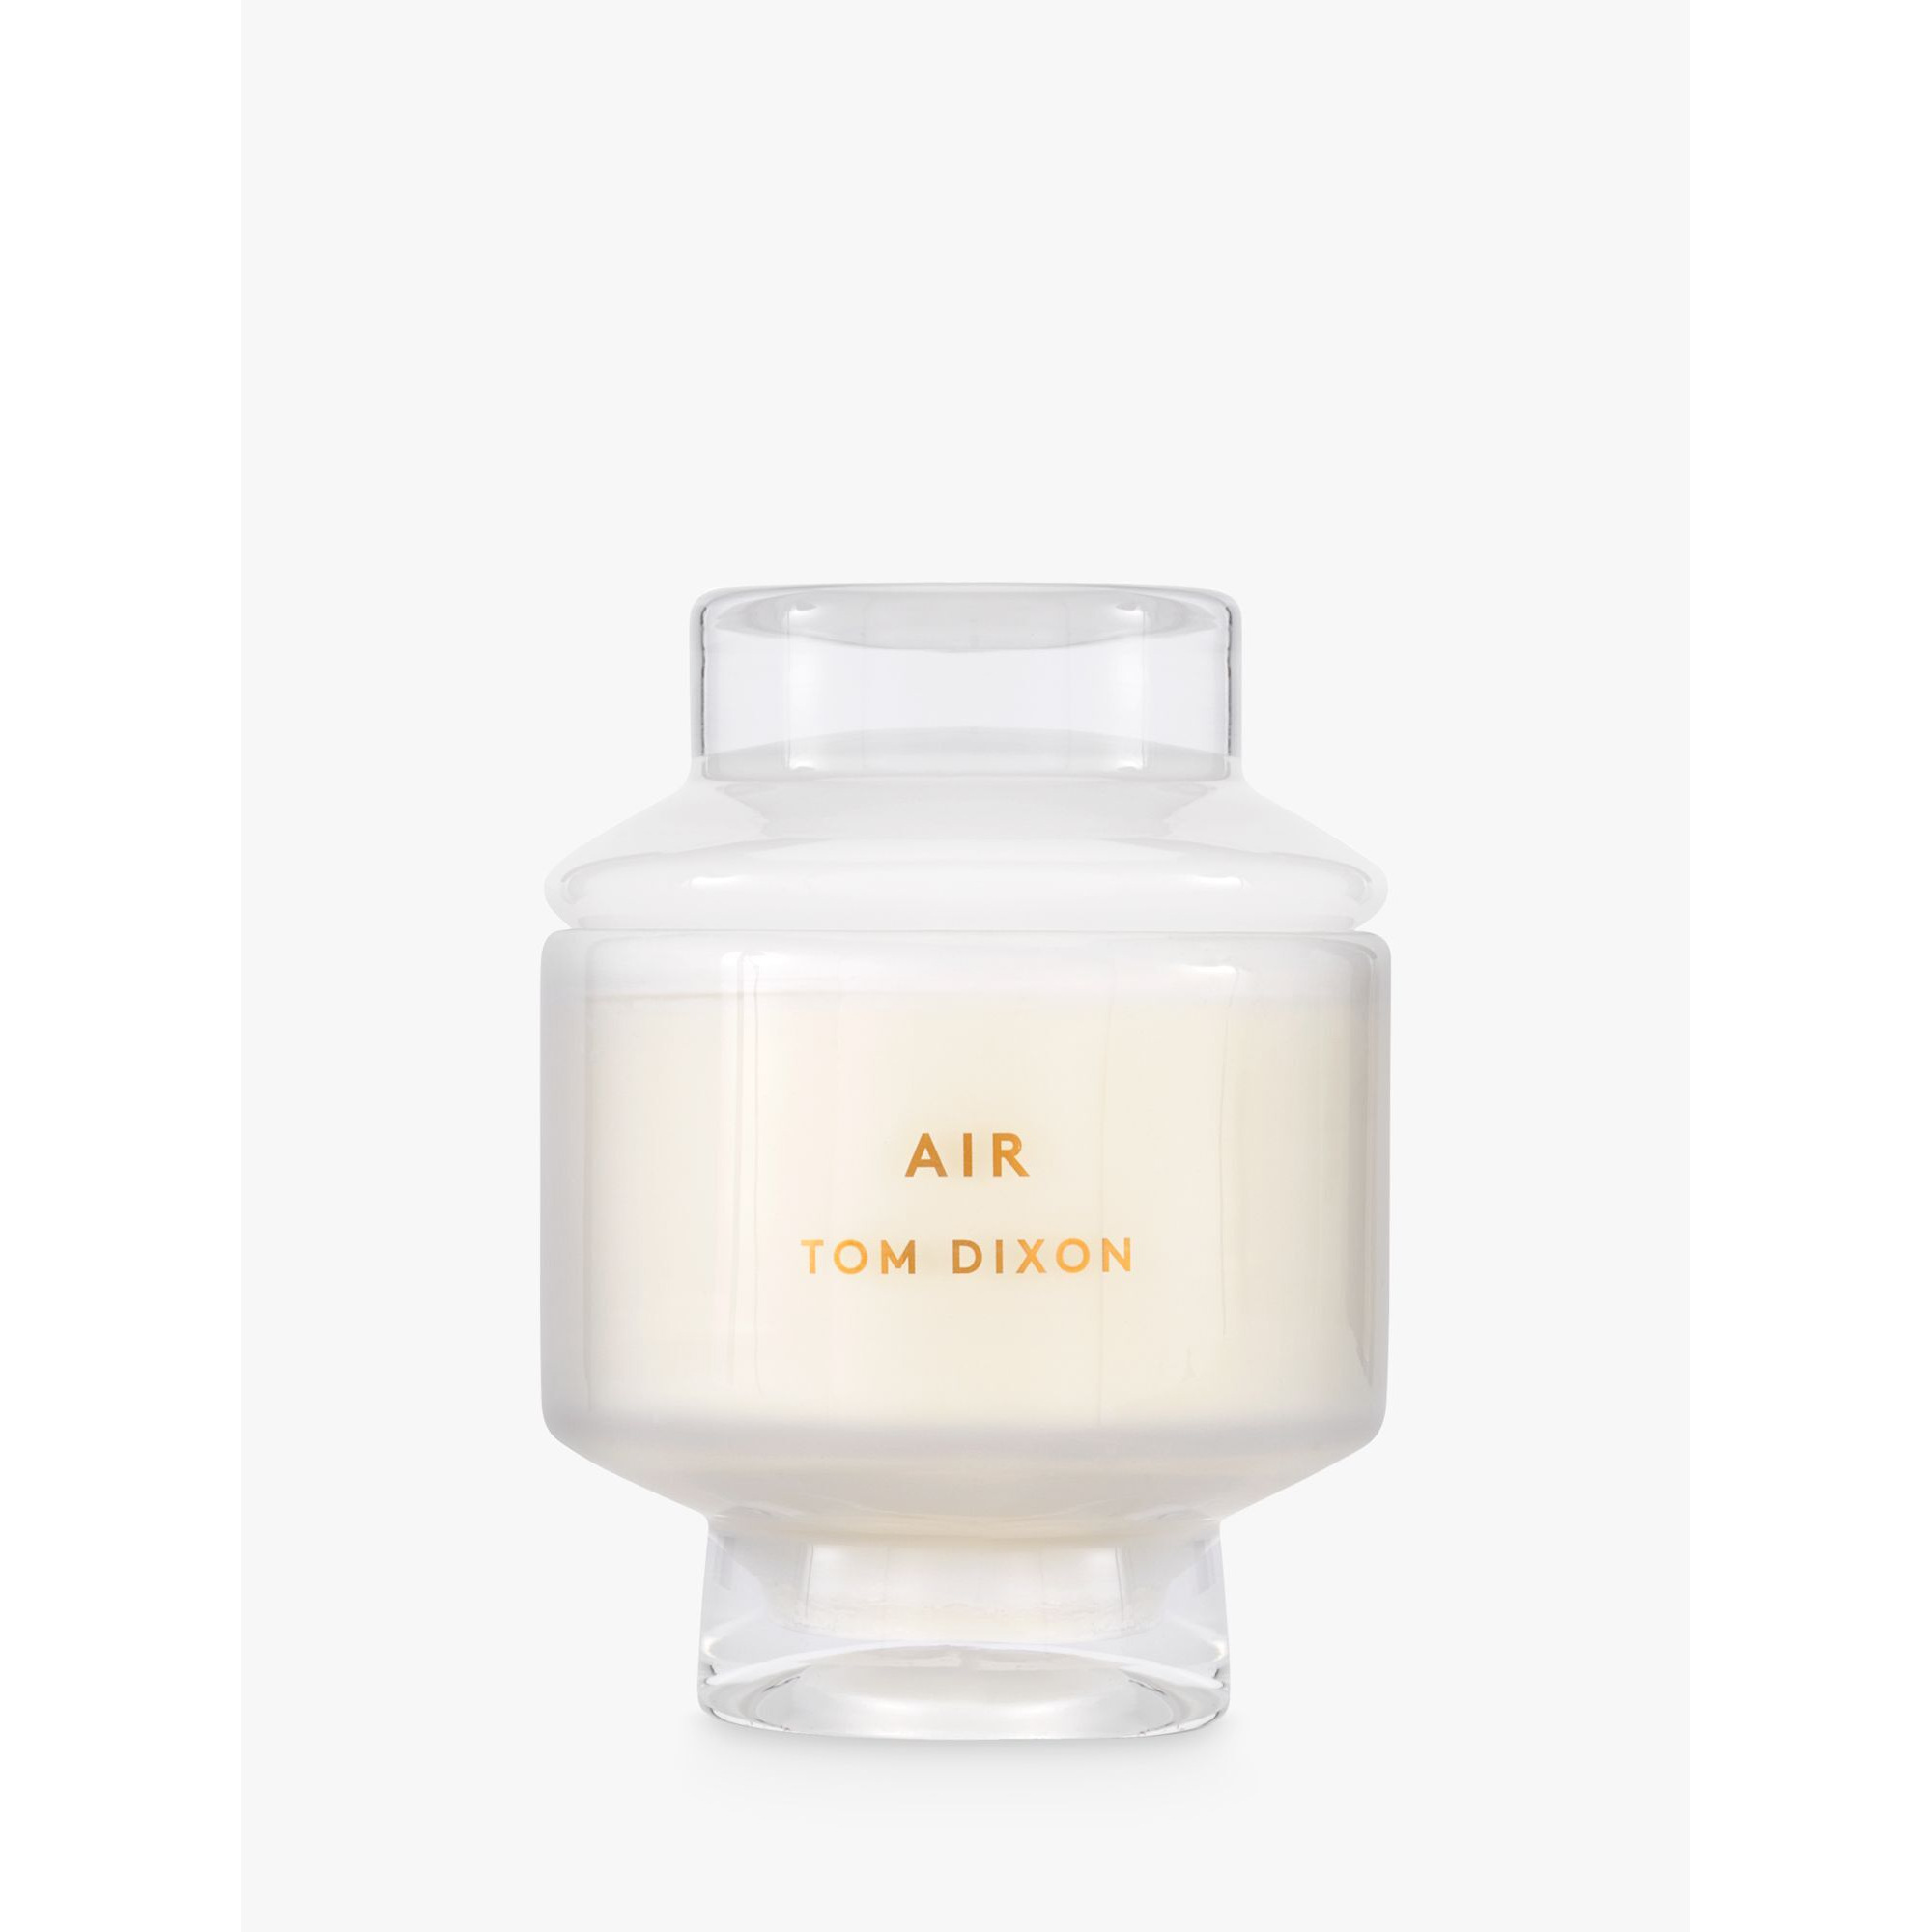 Tom Dixon Air Scented Candle, 1.4kg - image 1